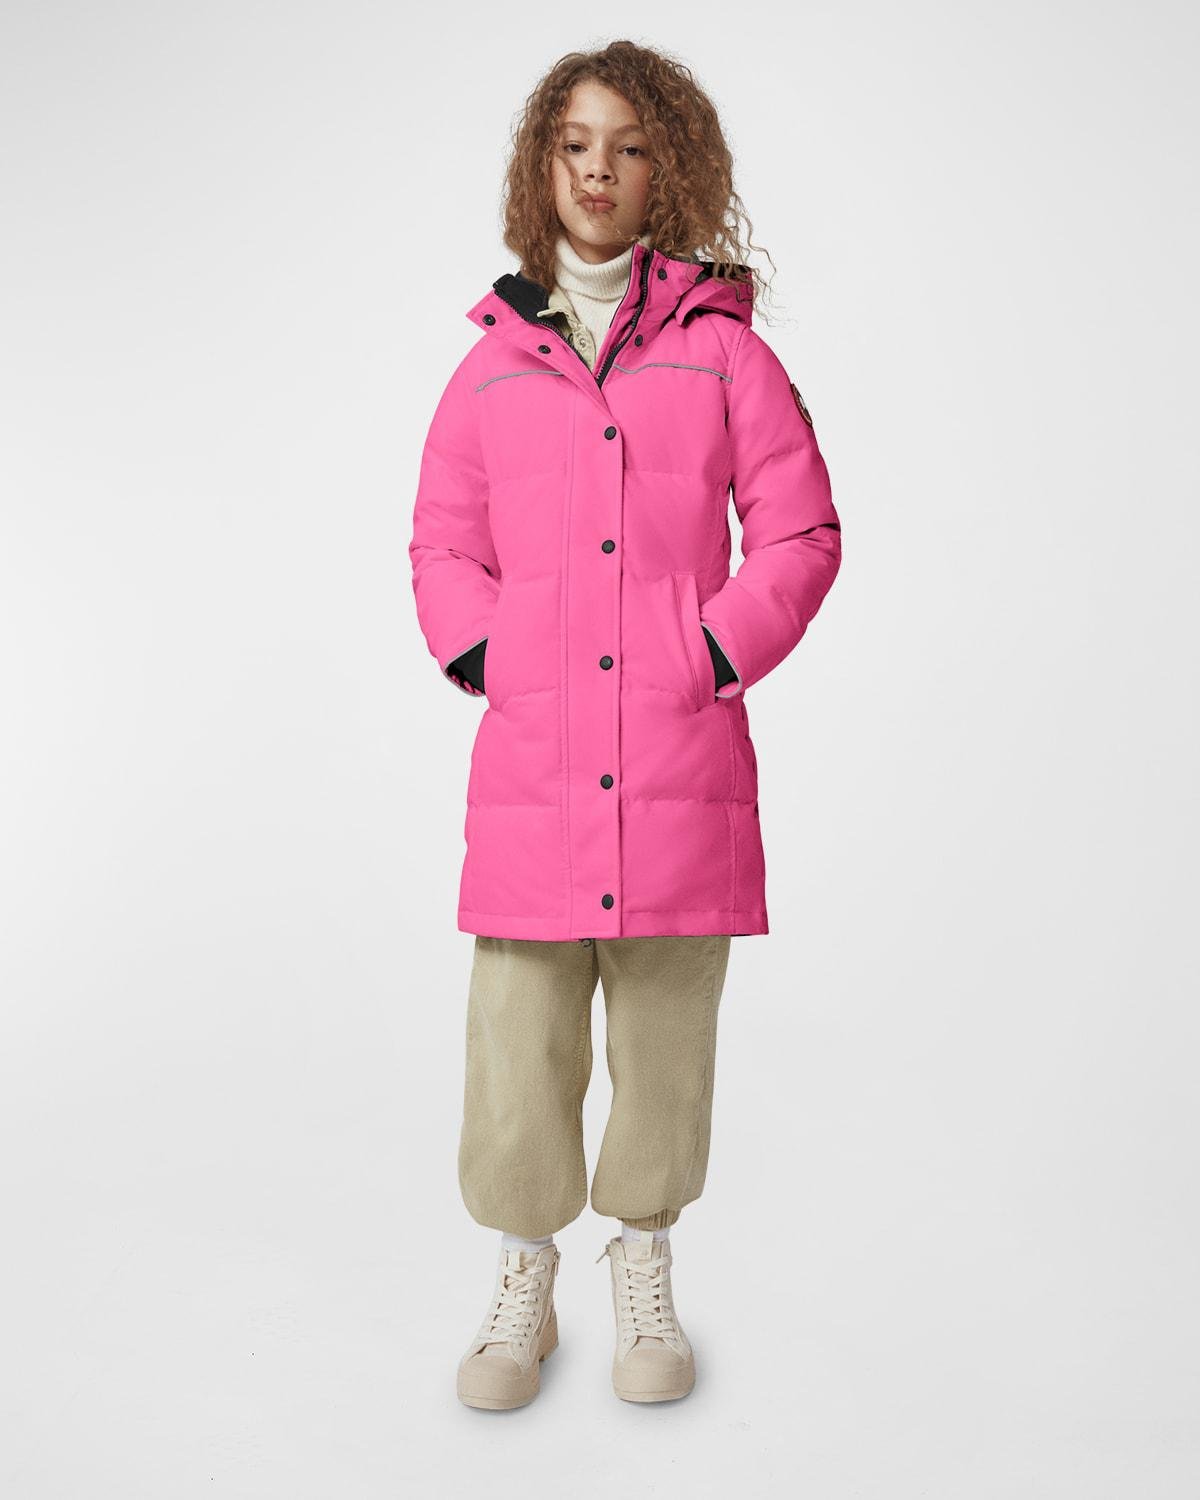 Kid's Juniper Parka, Size S-XL by CANADA GOOSE